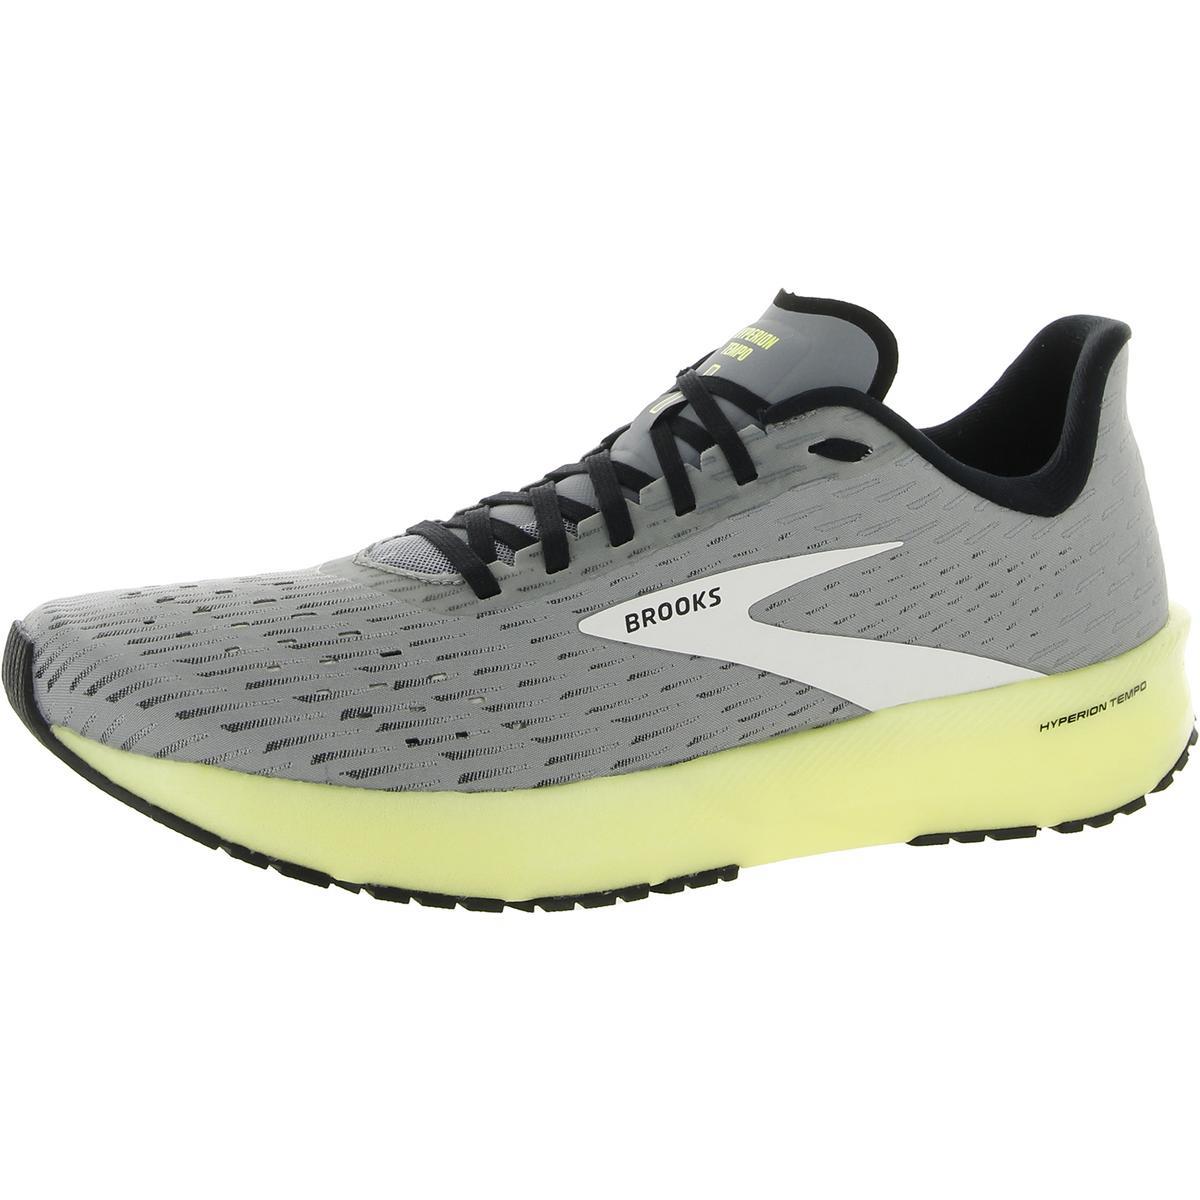 Brooks Mens Hyperion Tempo Fitness Workout Running Shoes Sneakers Bhfo 8544 Grey/Green/Black